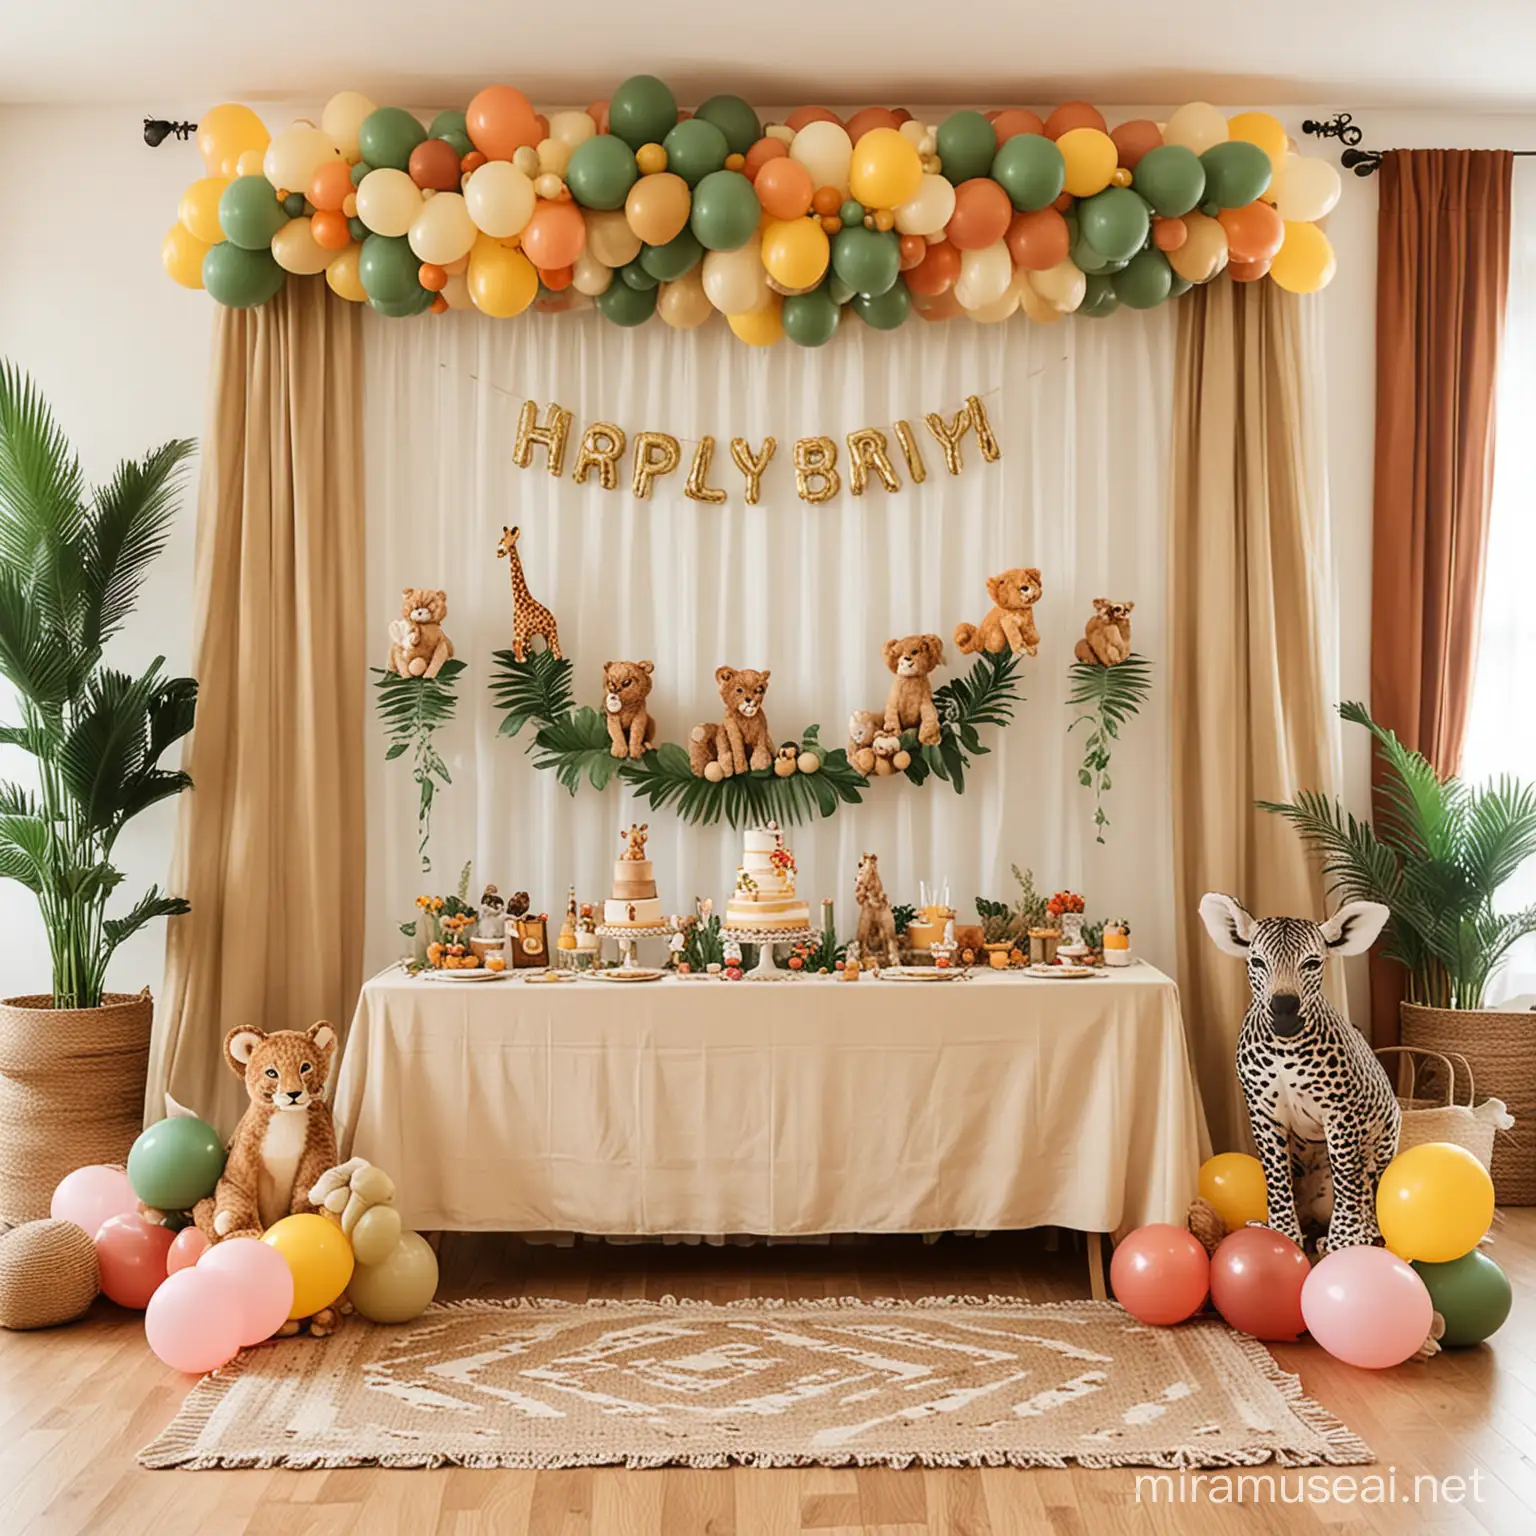 Create a picture of a babyshower with baby animal safari djungle theme in pastell colors of beige, brown, green and yellow. The picture should include ballons and other decorative pieces of decorations suited for a nonspecific gender. In the background you can see red curtains on white walls which should be decorated. On the long table that is beautifully and bohemian and elegant set with matching theme.